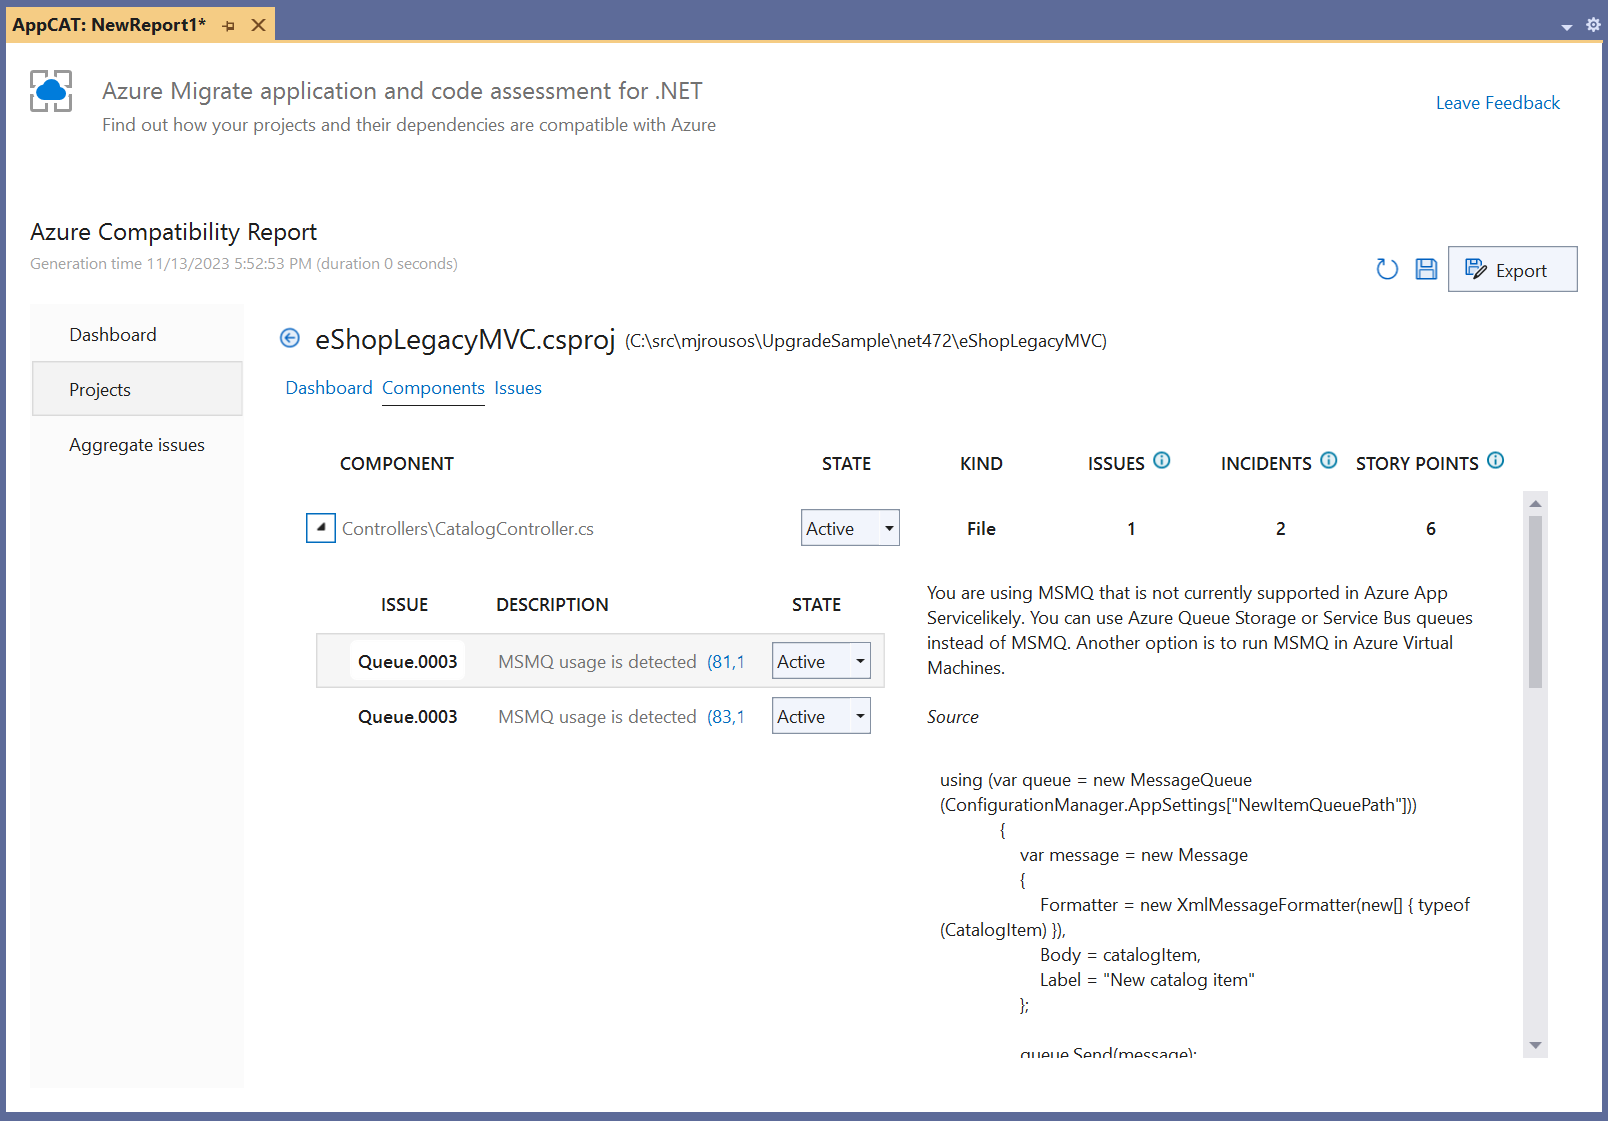 Figure 6: Azure Migrate application and code assessment issue details